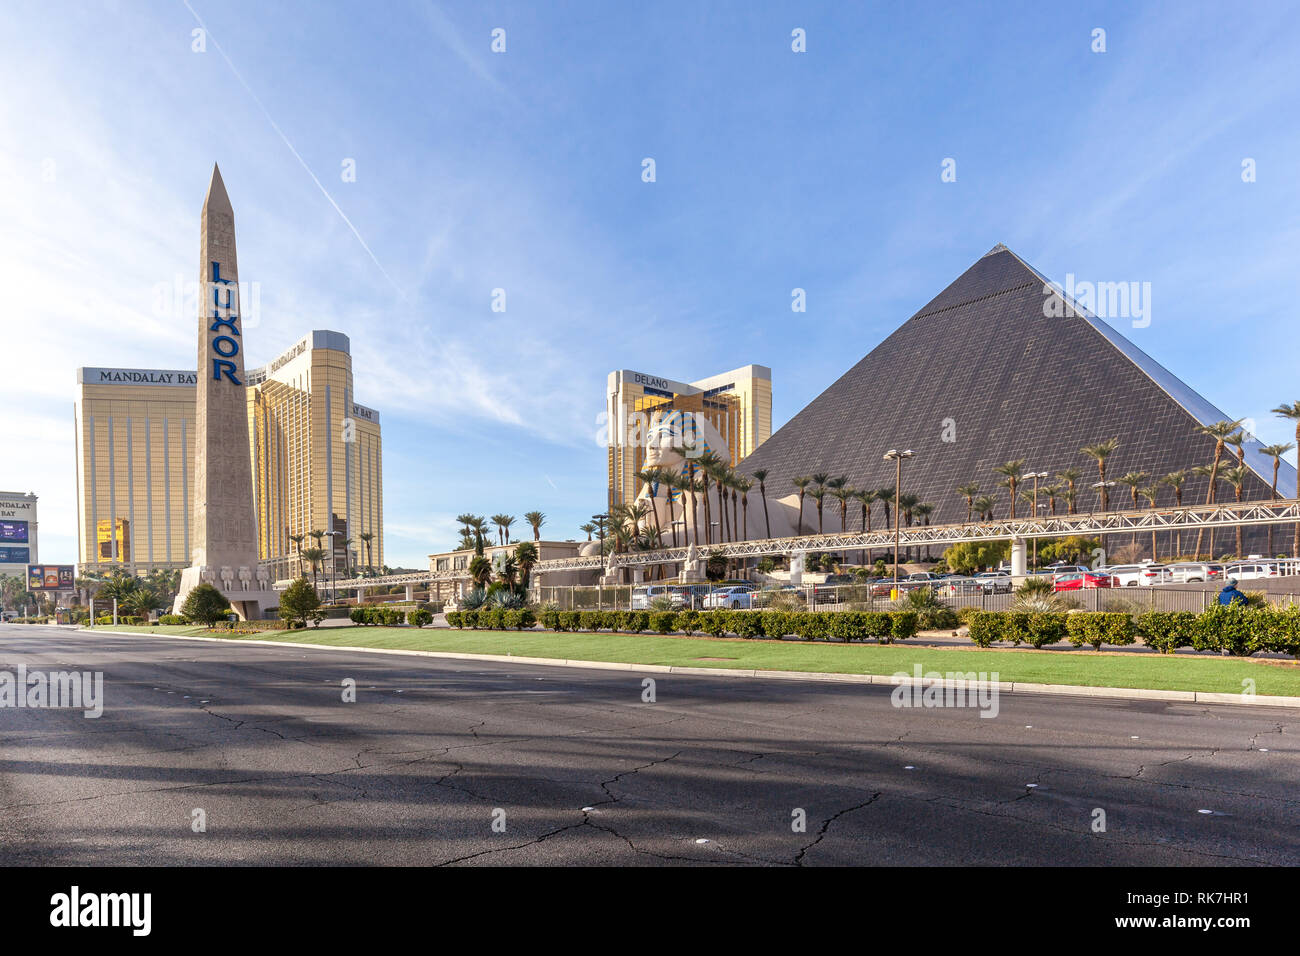 Las Vegas, NV, USA - 13th July 2013: The Pyramid Luxor Hotel And Casino On Las  Vegas Strip. Stock Photo, Picture and Royalty Free Image. Image 26254660.